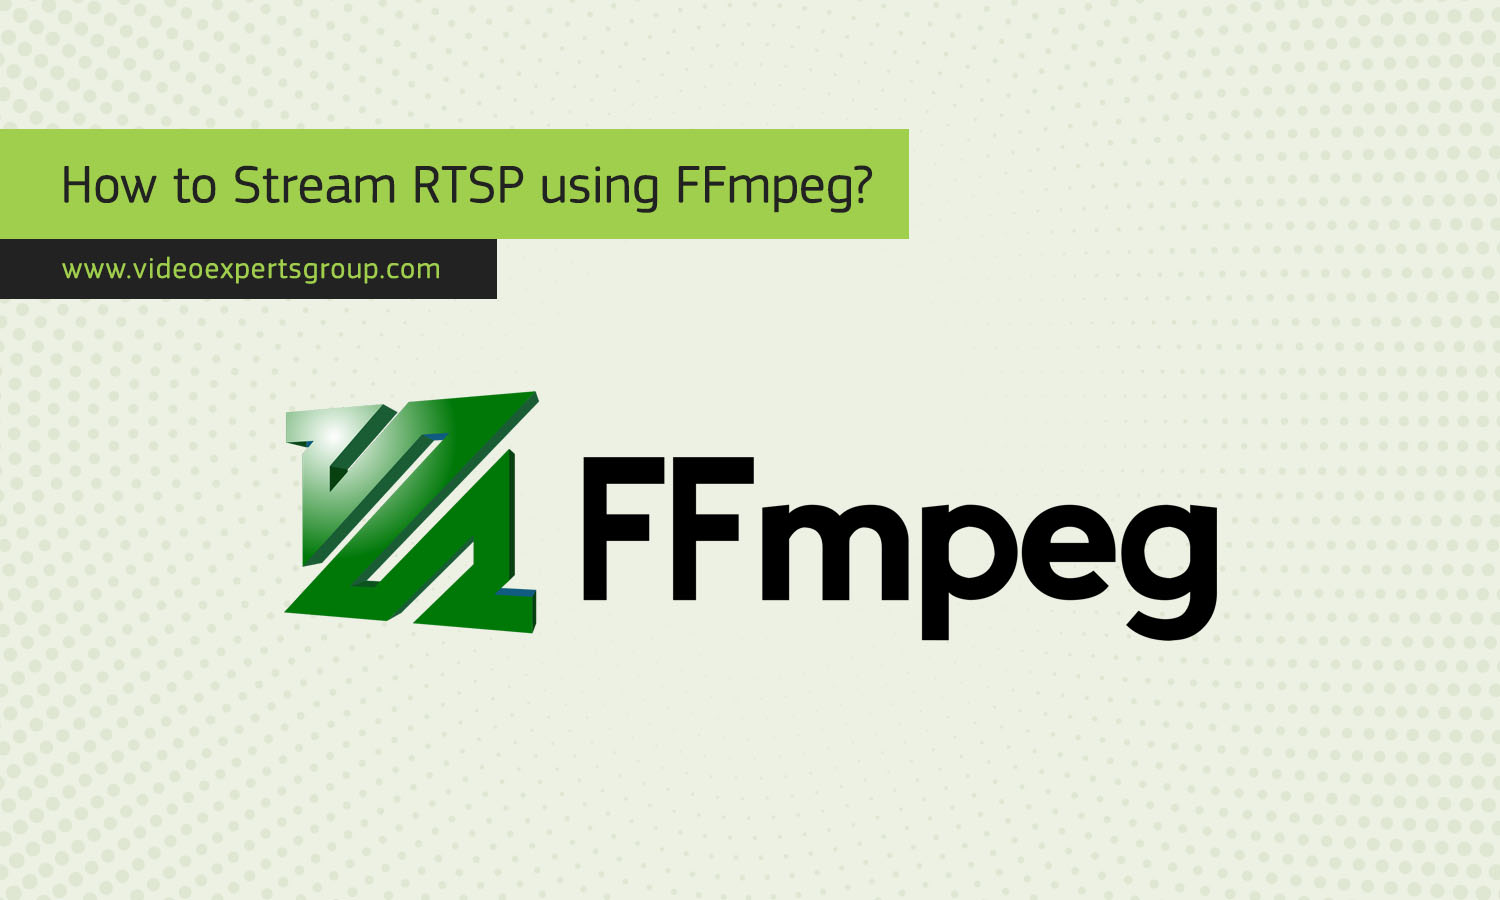 How to Stream RTSP using FFmpeg?